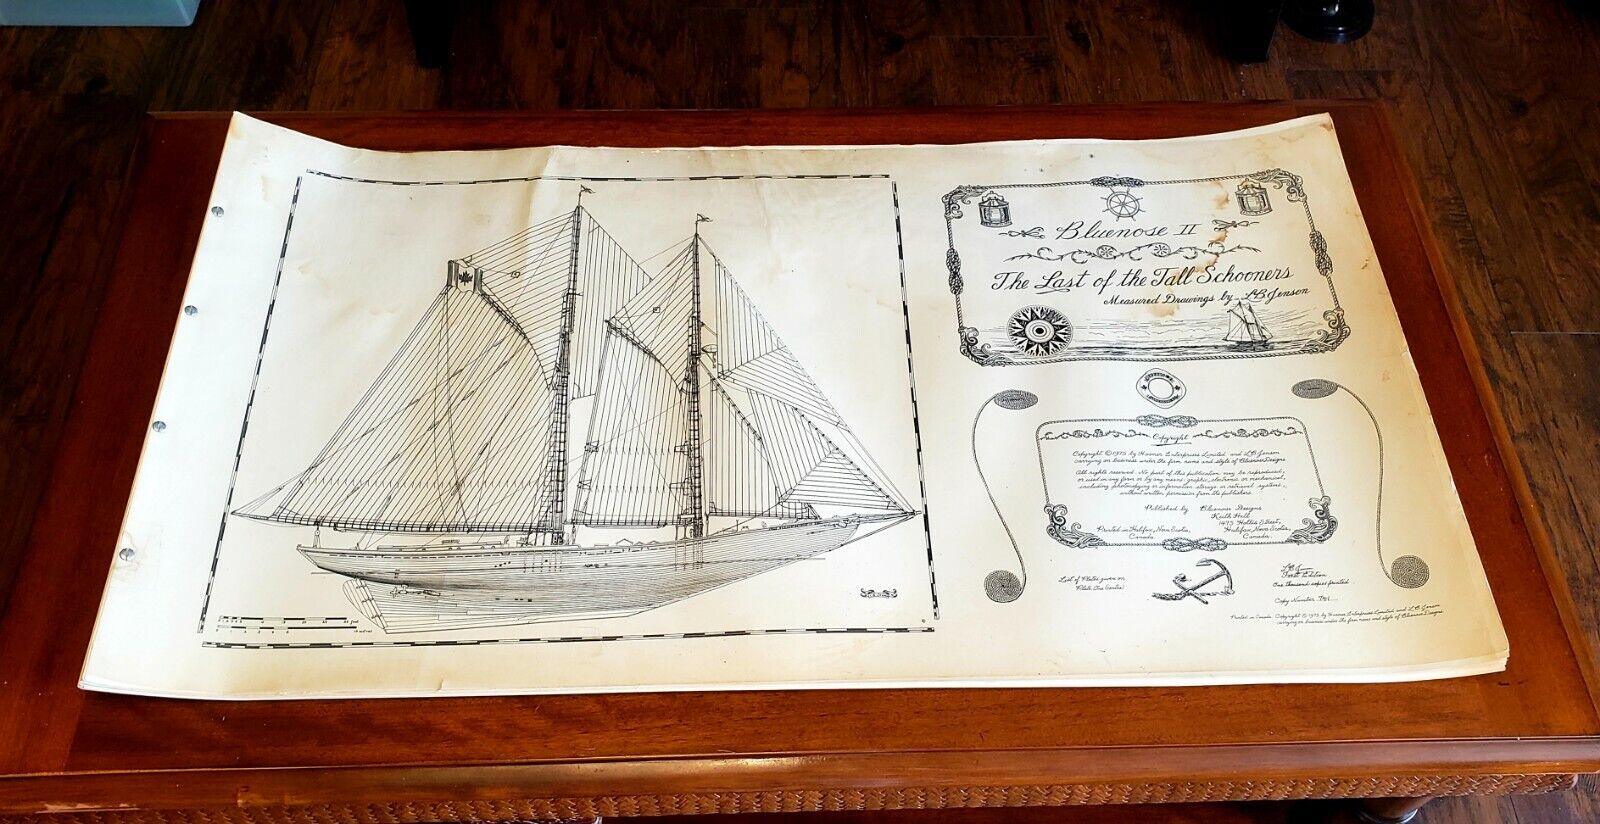 1975 Bluenose Ii  Measured Drawings, Signed & Numbered By L. B Jenson, 32 Plates